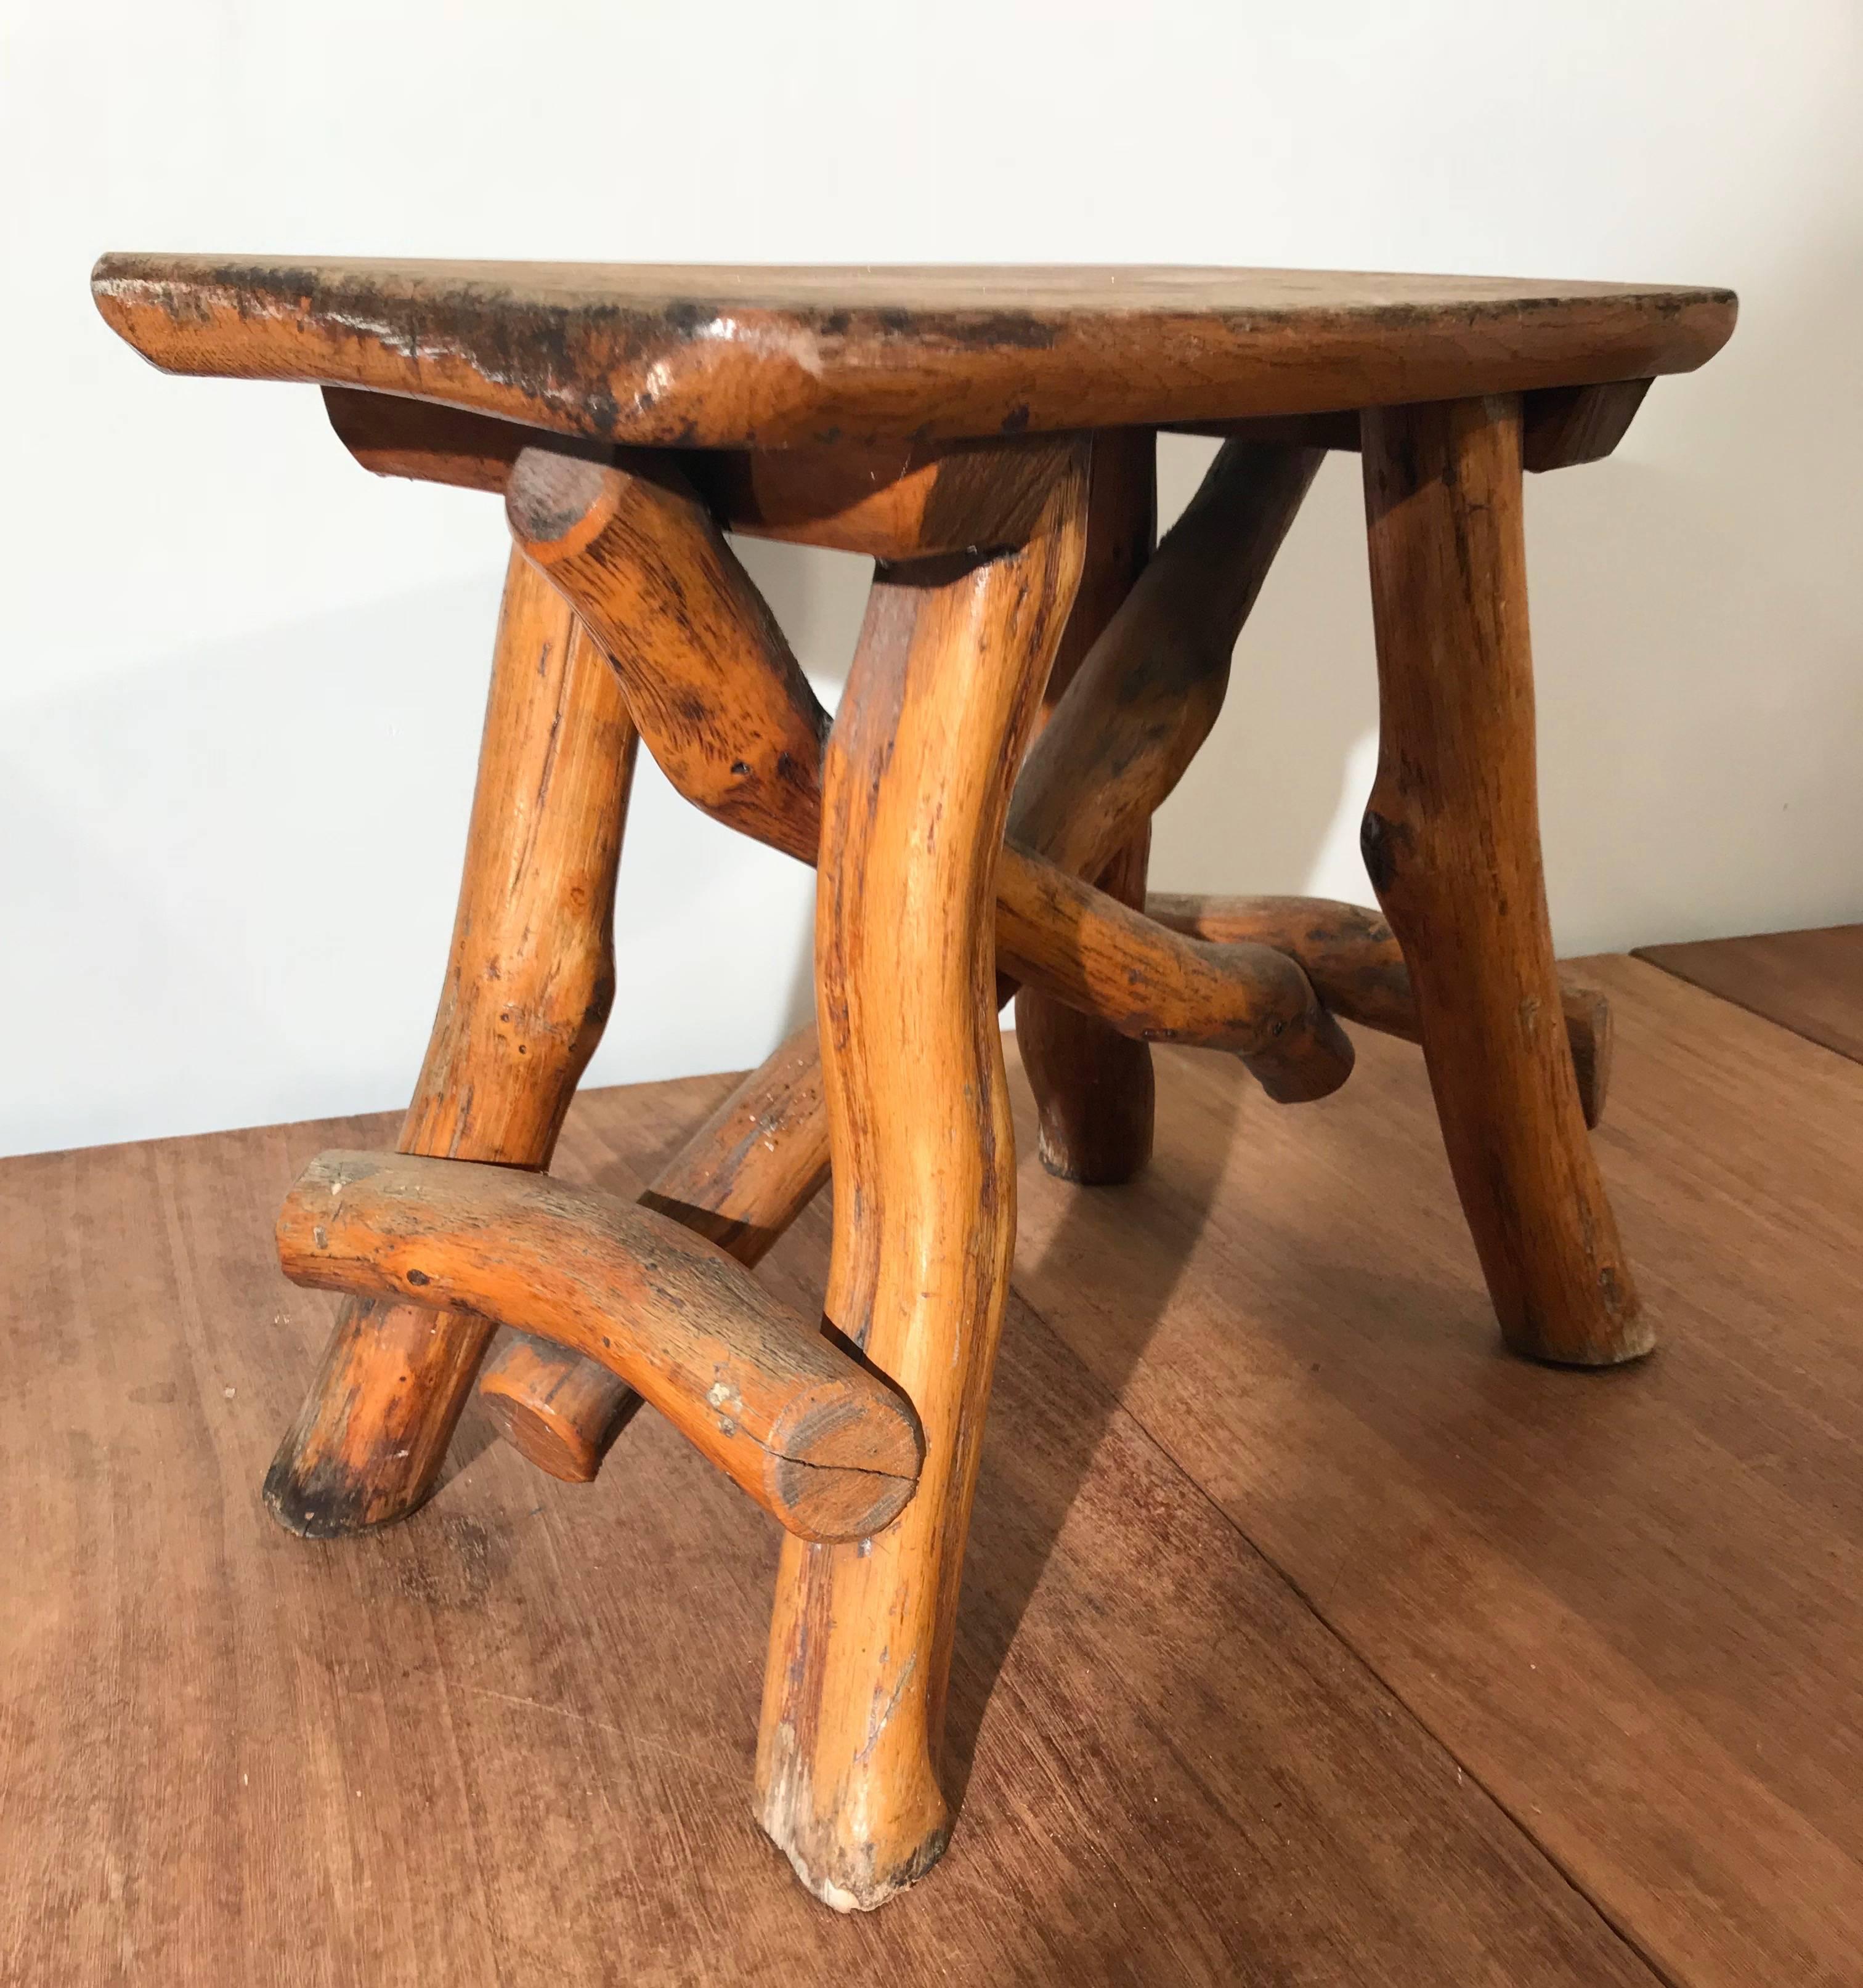 Antique Hand-Crafted Rustic and Organic Oak Tree Stool for Indoor or Outdoor In Good Condition For Sale In Lisse, NL